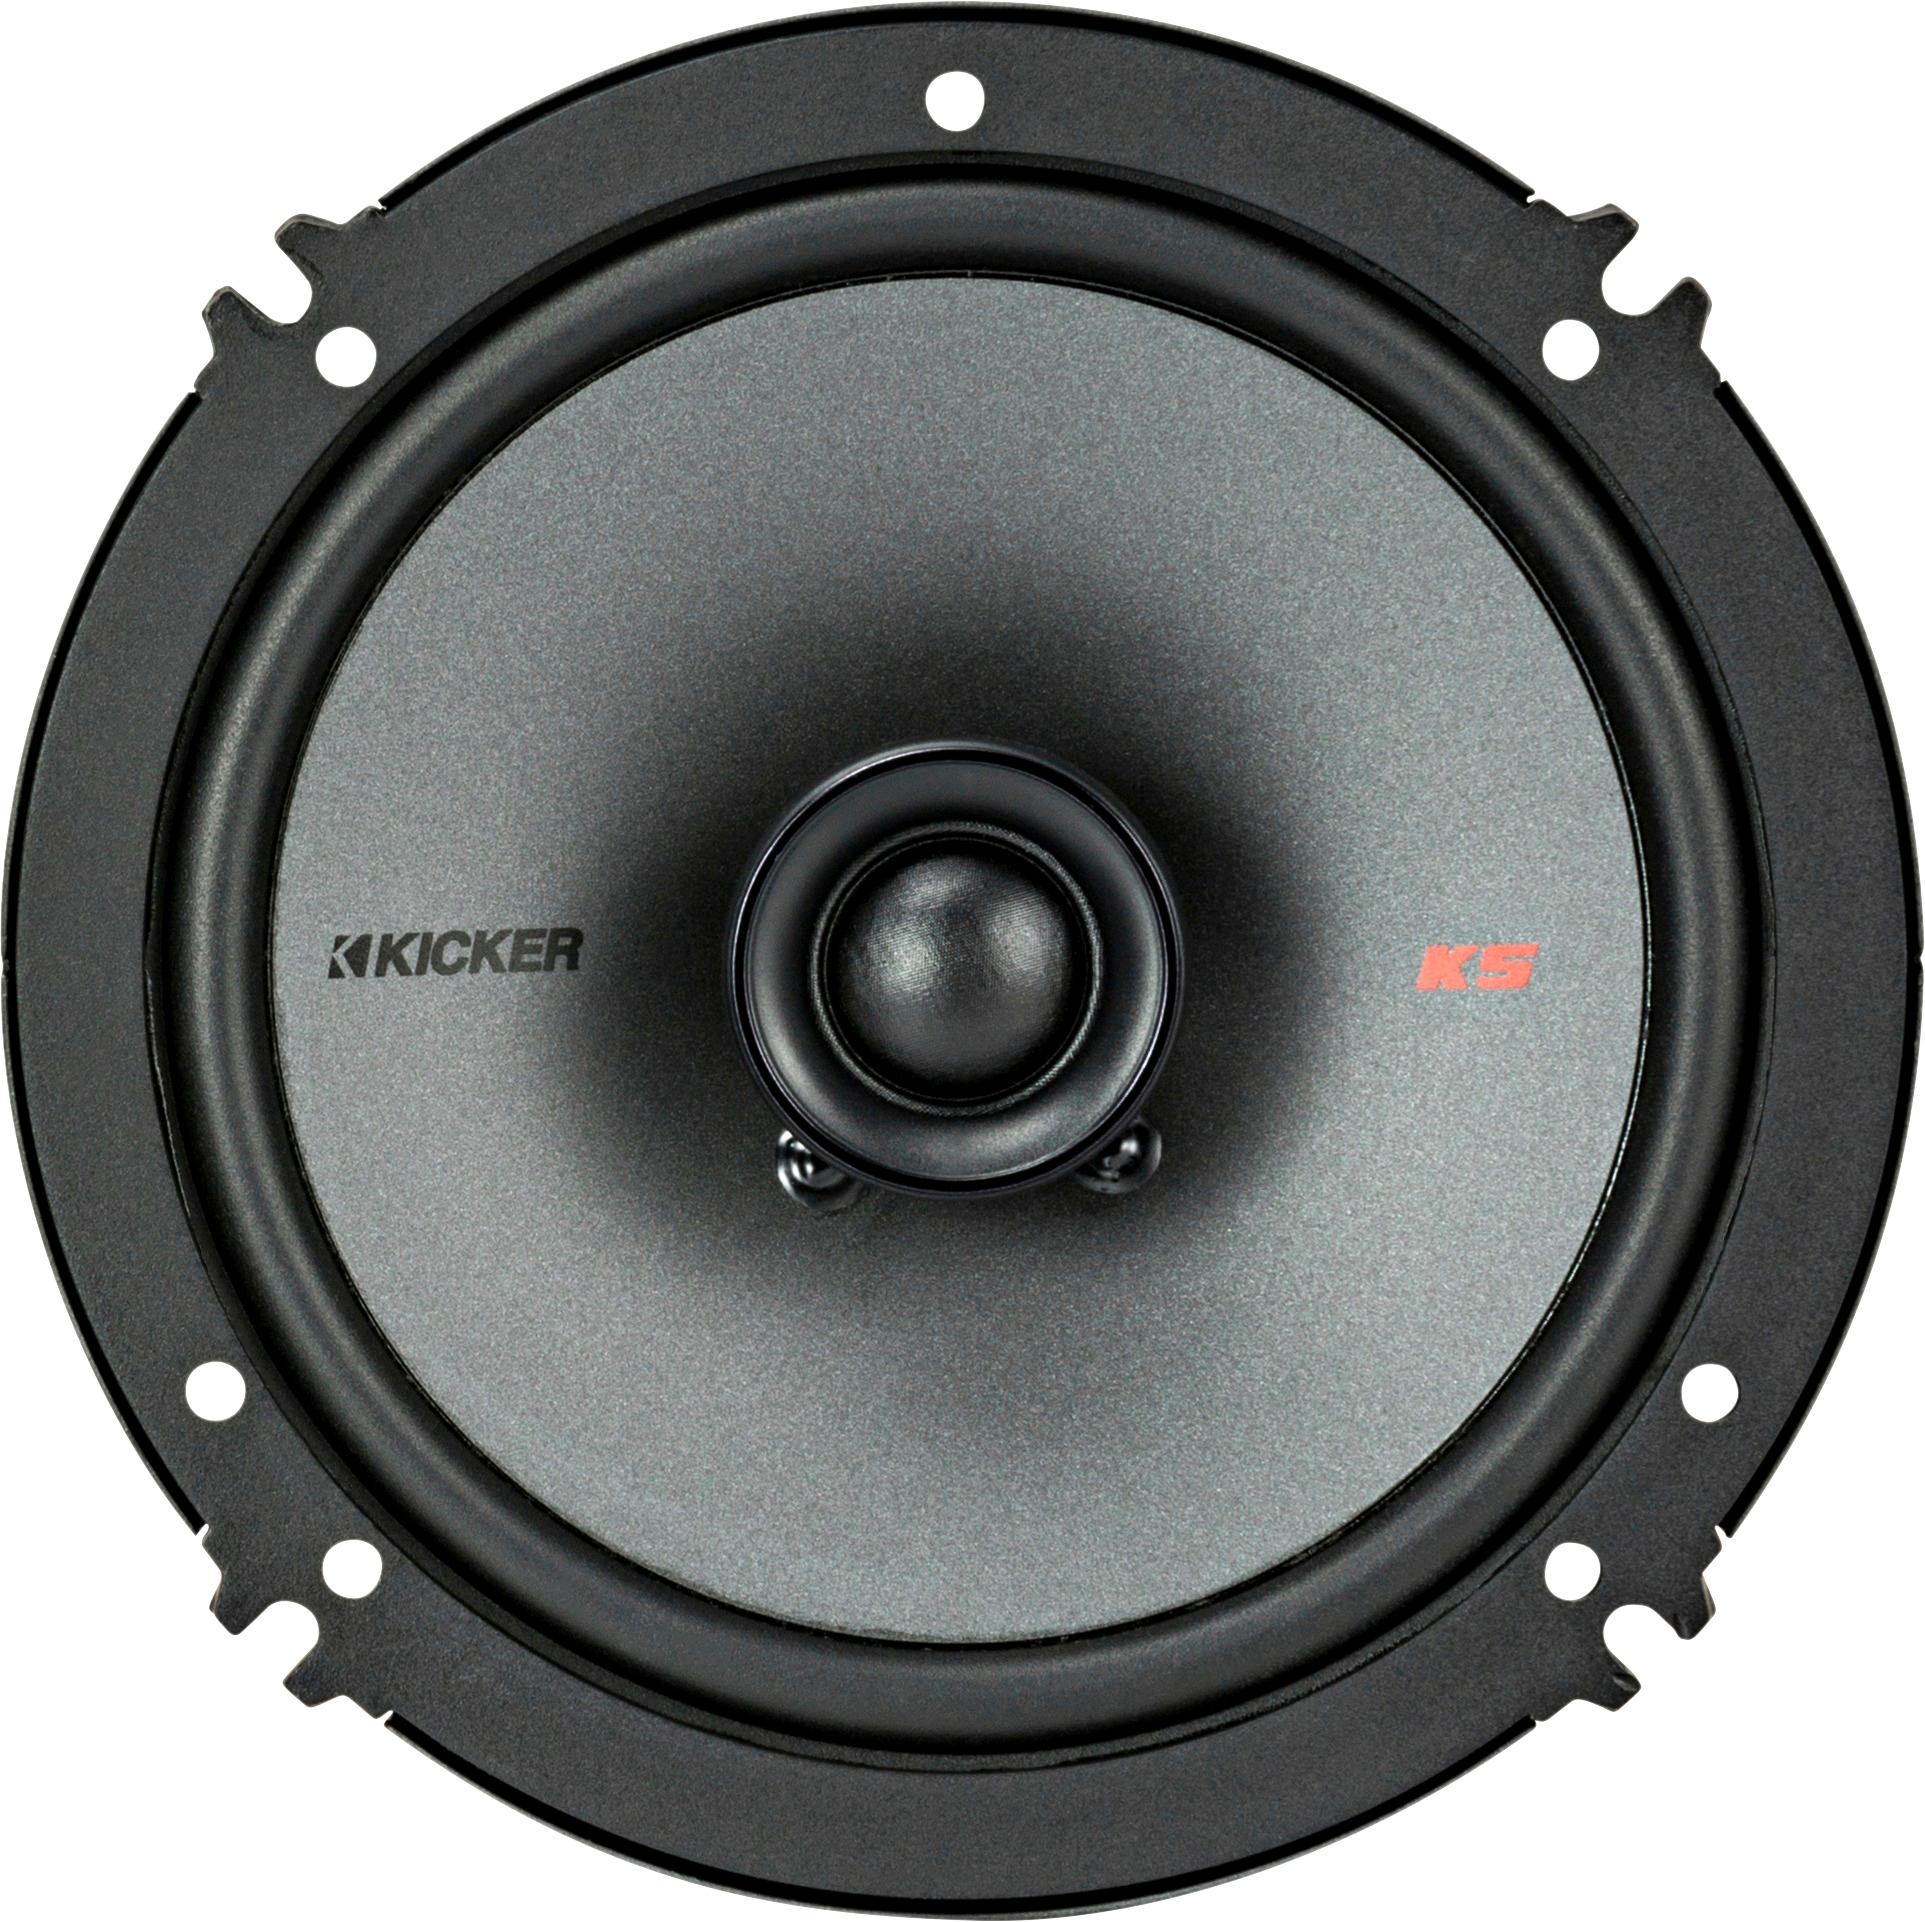 KICKER - 6-1/2 2-Way Car Speakers with Polypropylene Cones (Pair) - Black was $99.99 now $79.99 (20.0% off)